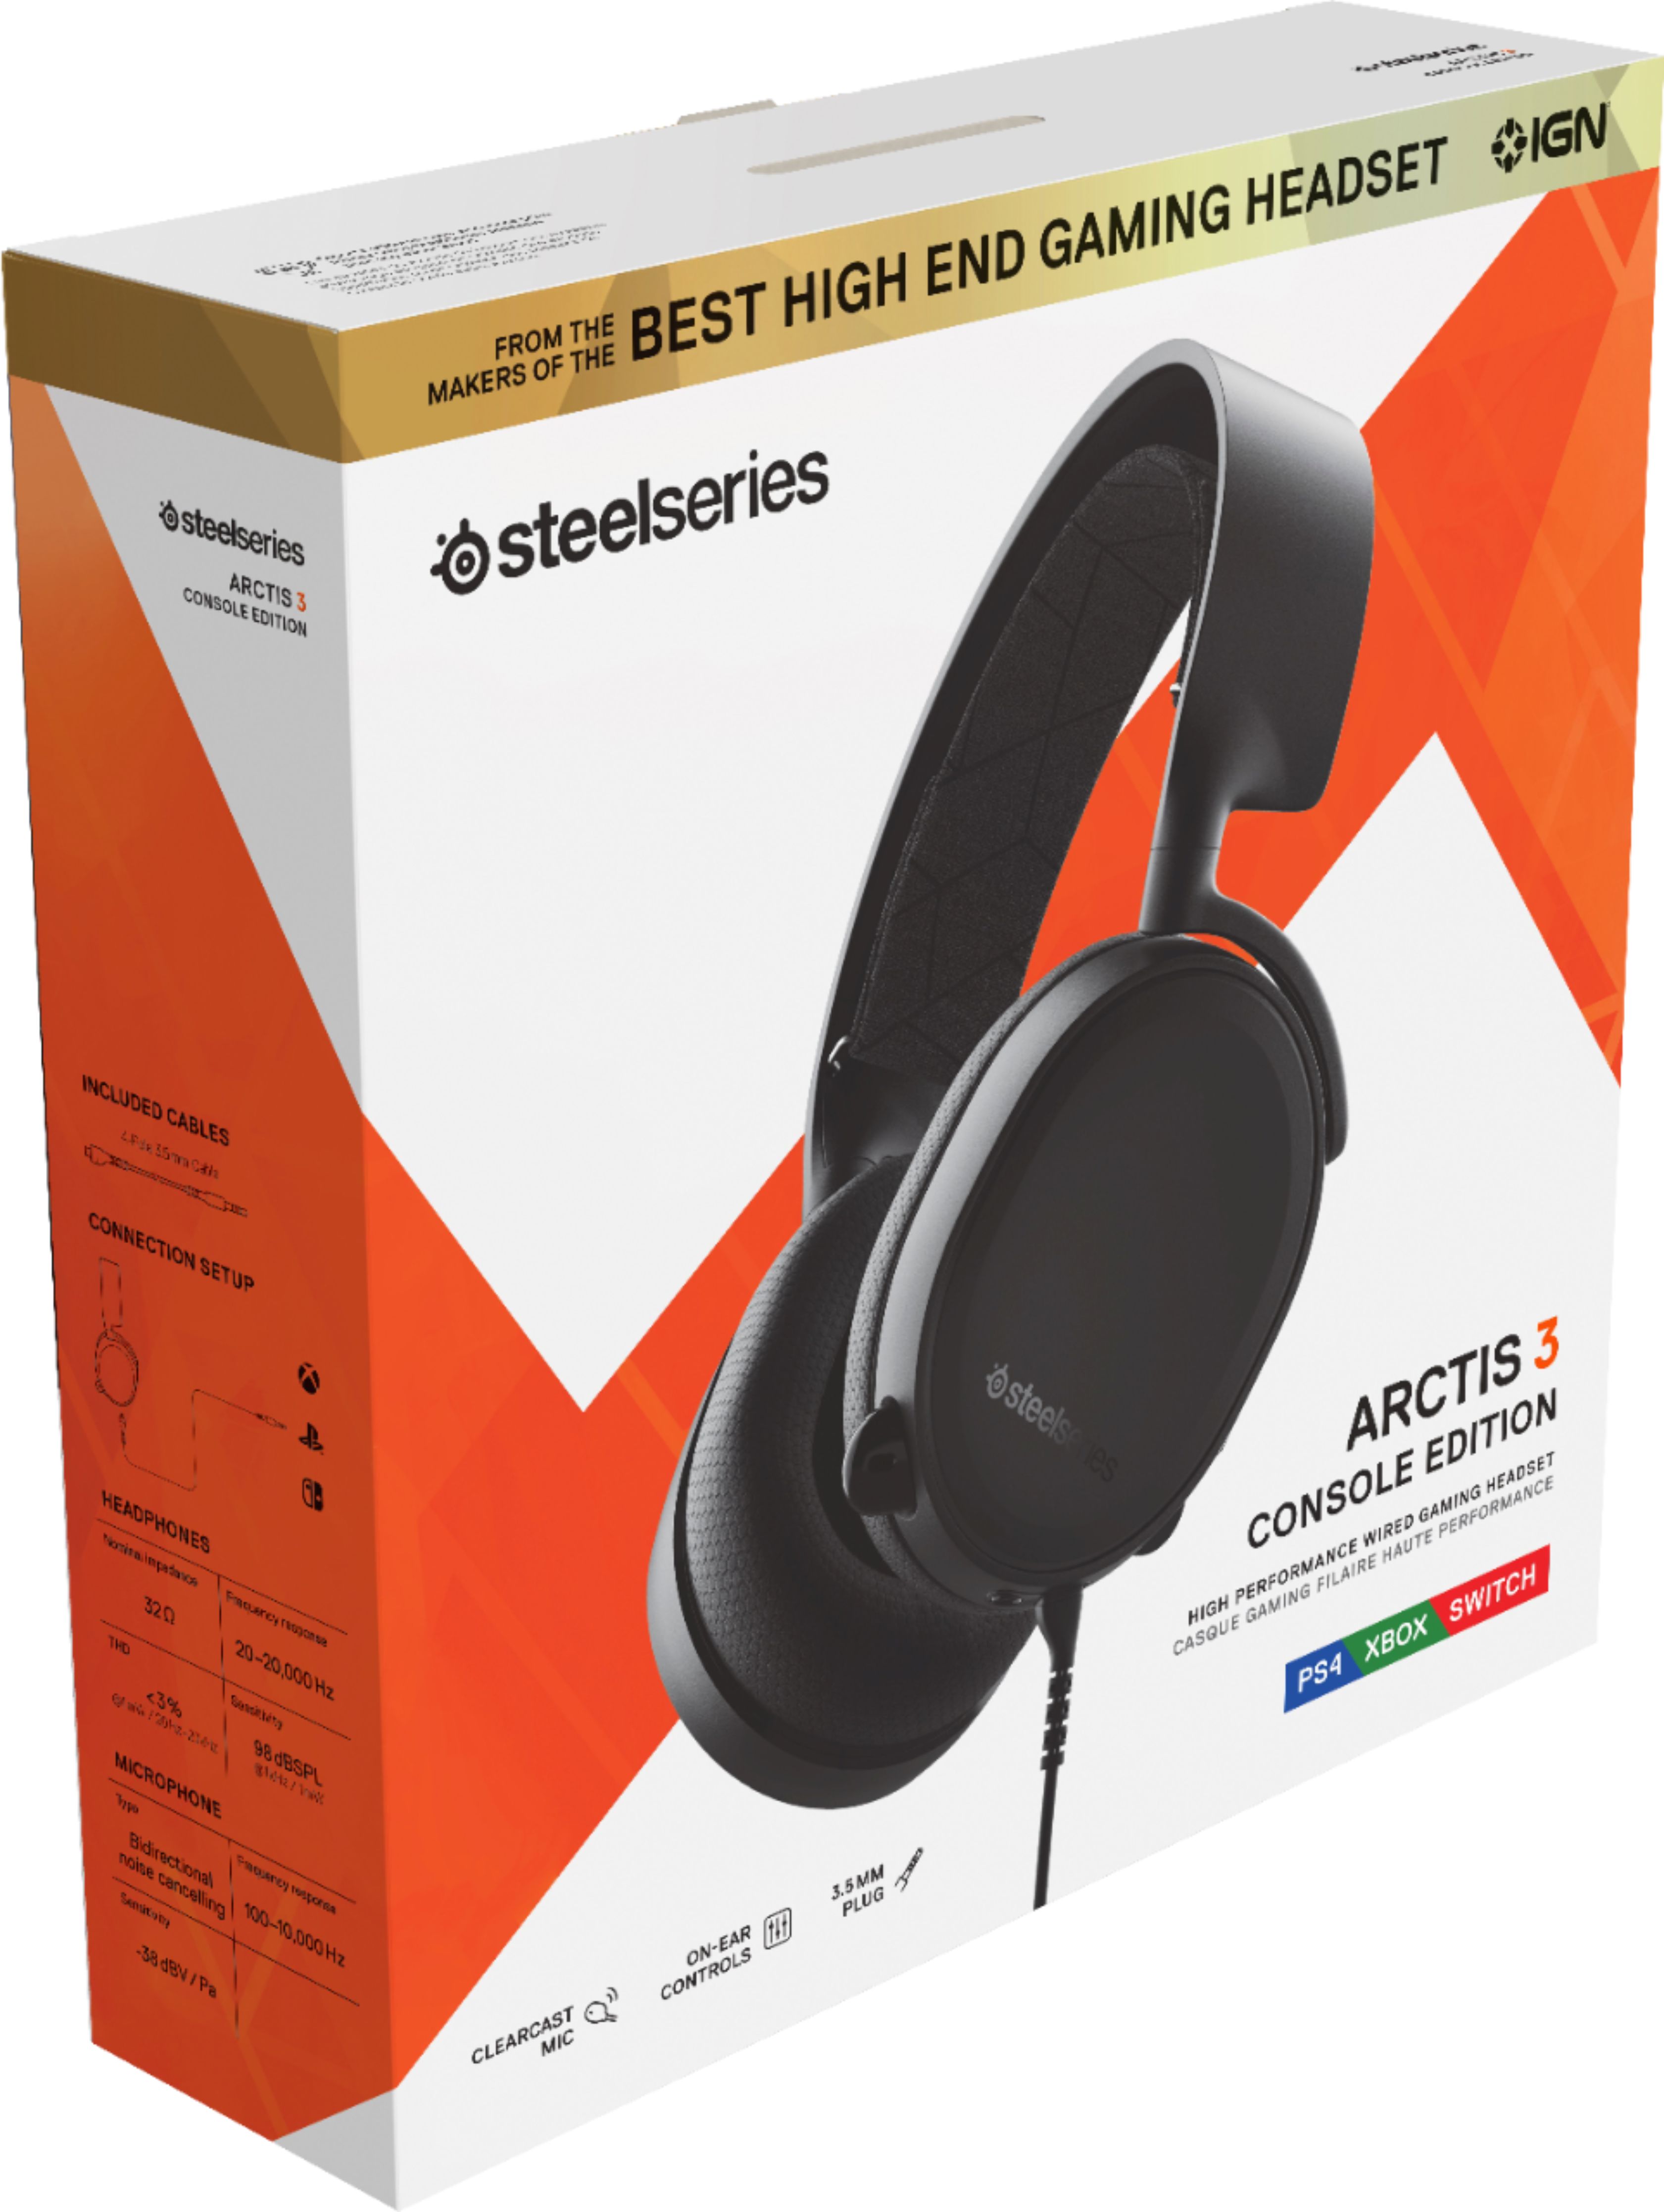 steelseries arctis 3 console edition wire